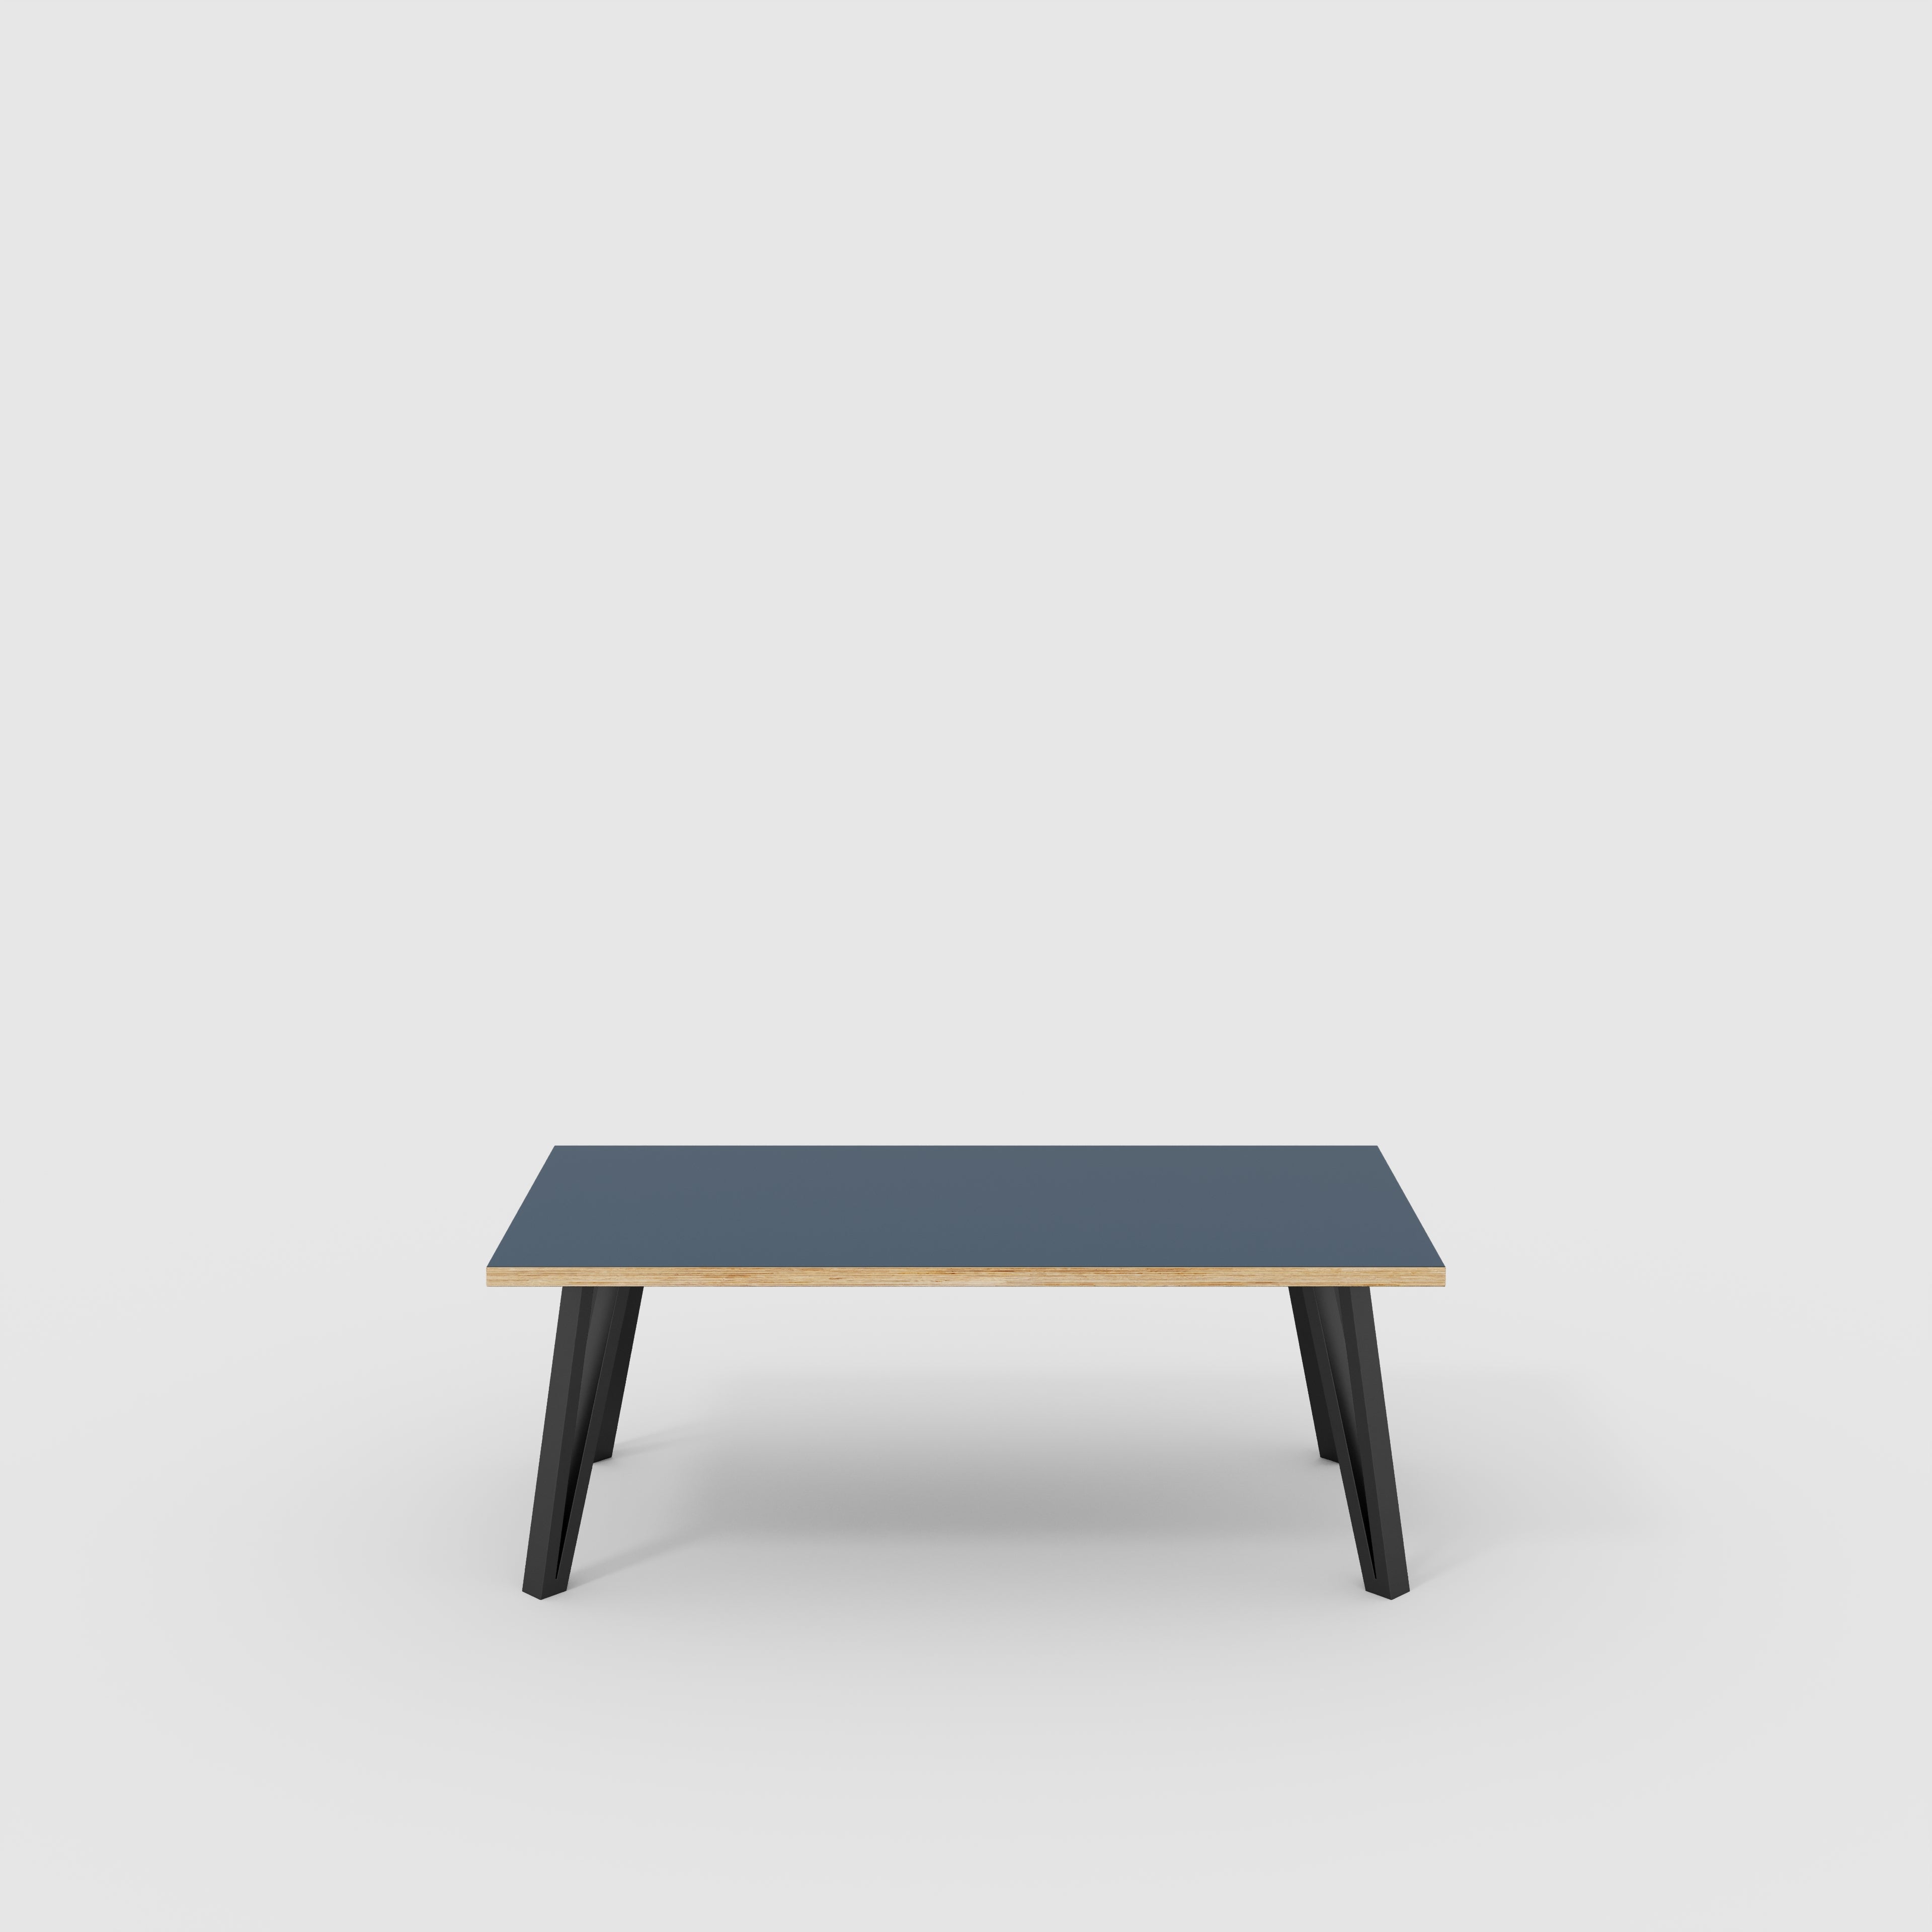 Coffee Table with Black Box Hairpin Legs - Formica Night Sea Blue - 1200(w) x 600(d) x 425(h)